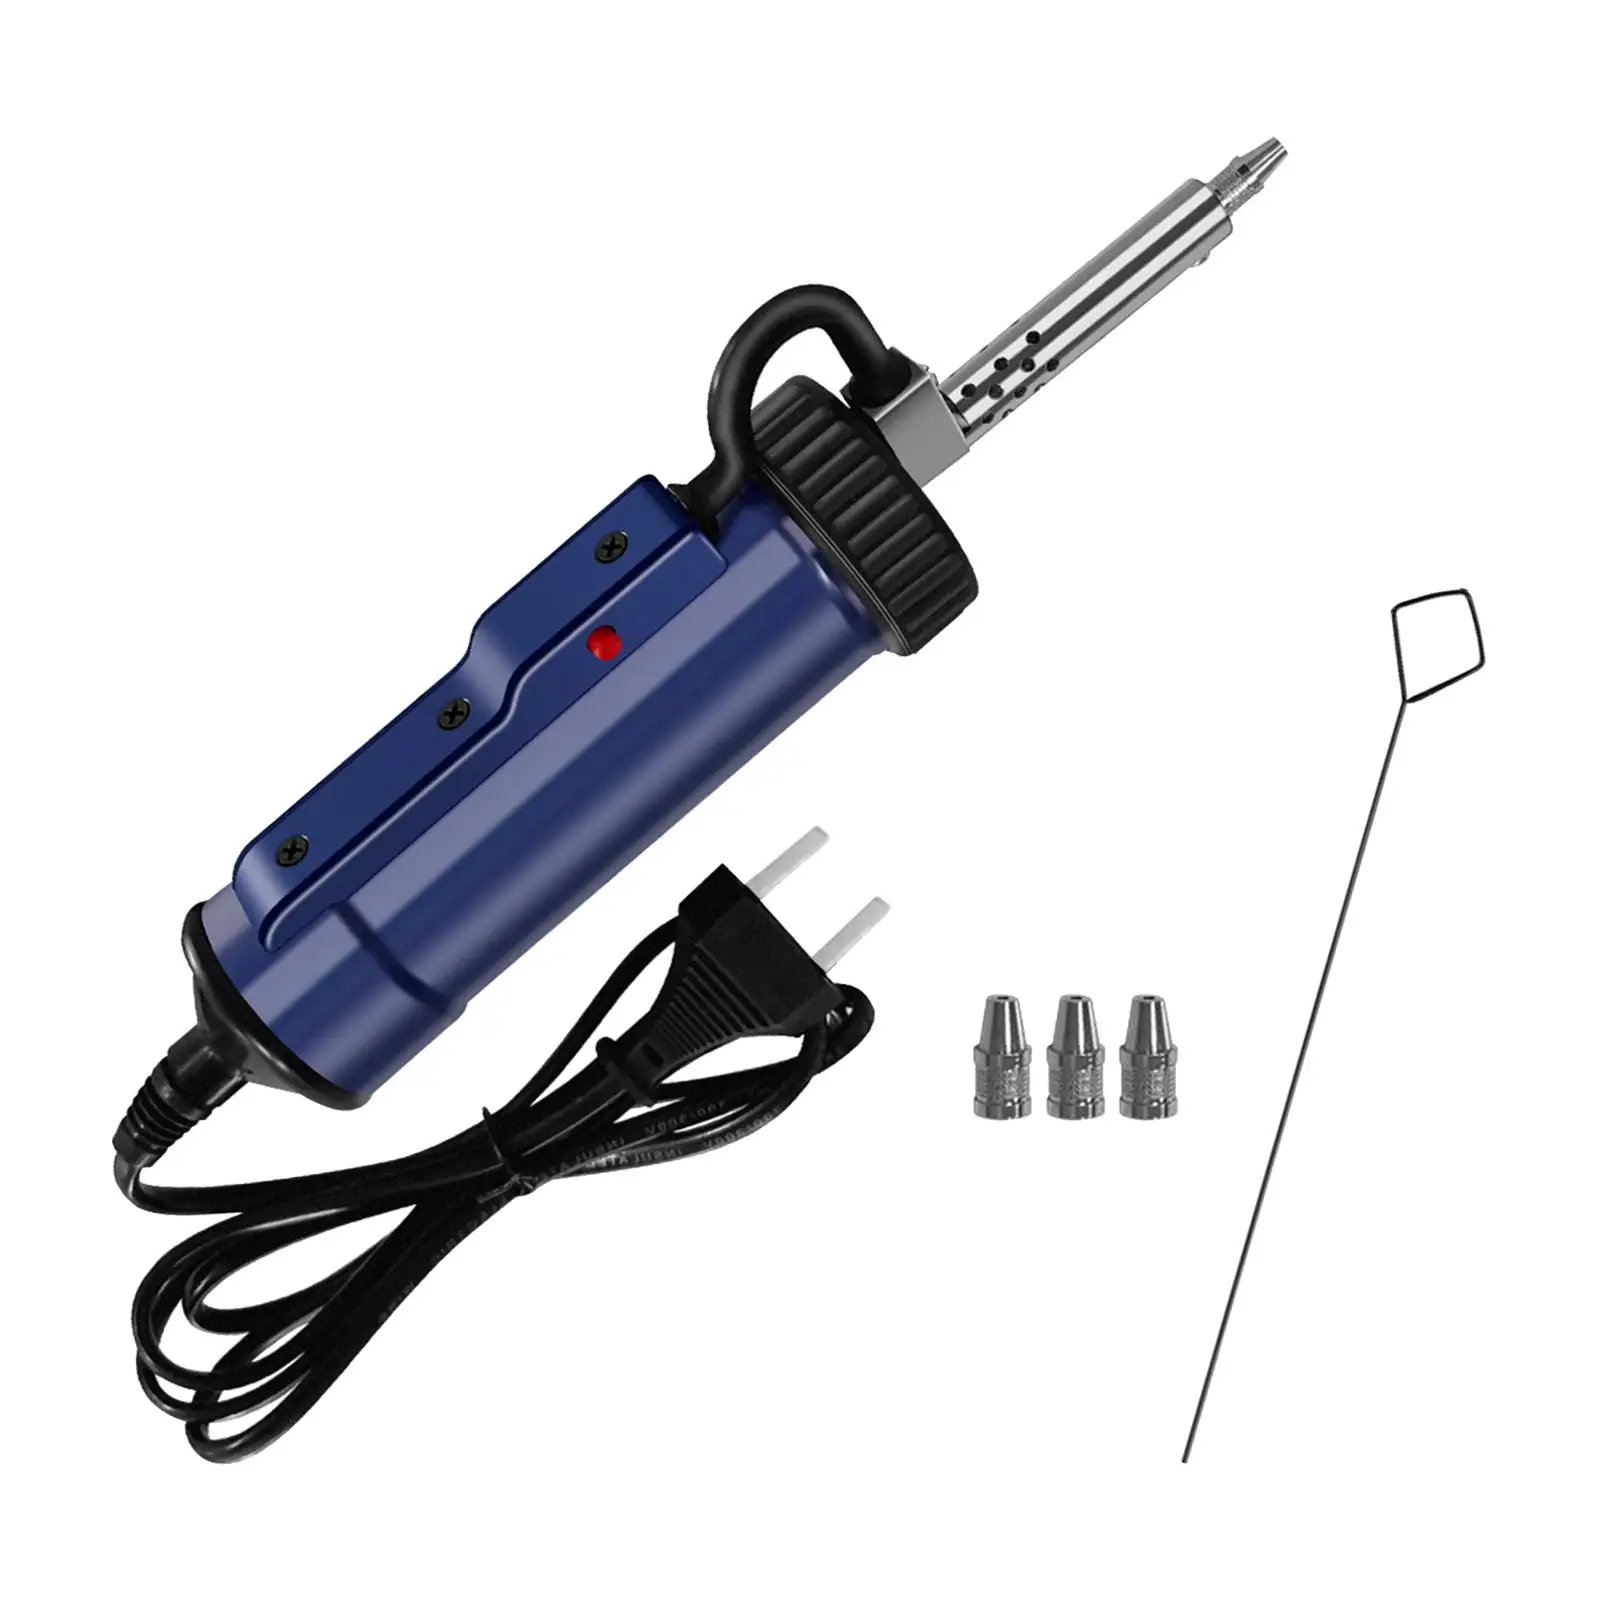 Solder suckers us Adapter 30W Welding Automatic Handheld Solder Iron Kits for Home DIY Hobby Jewelry Industry Circuit Board